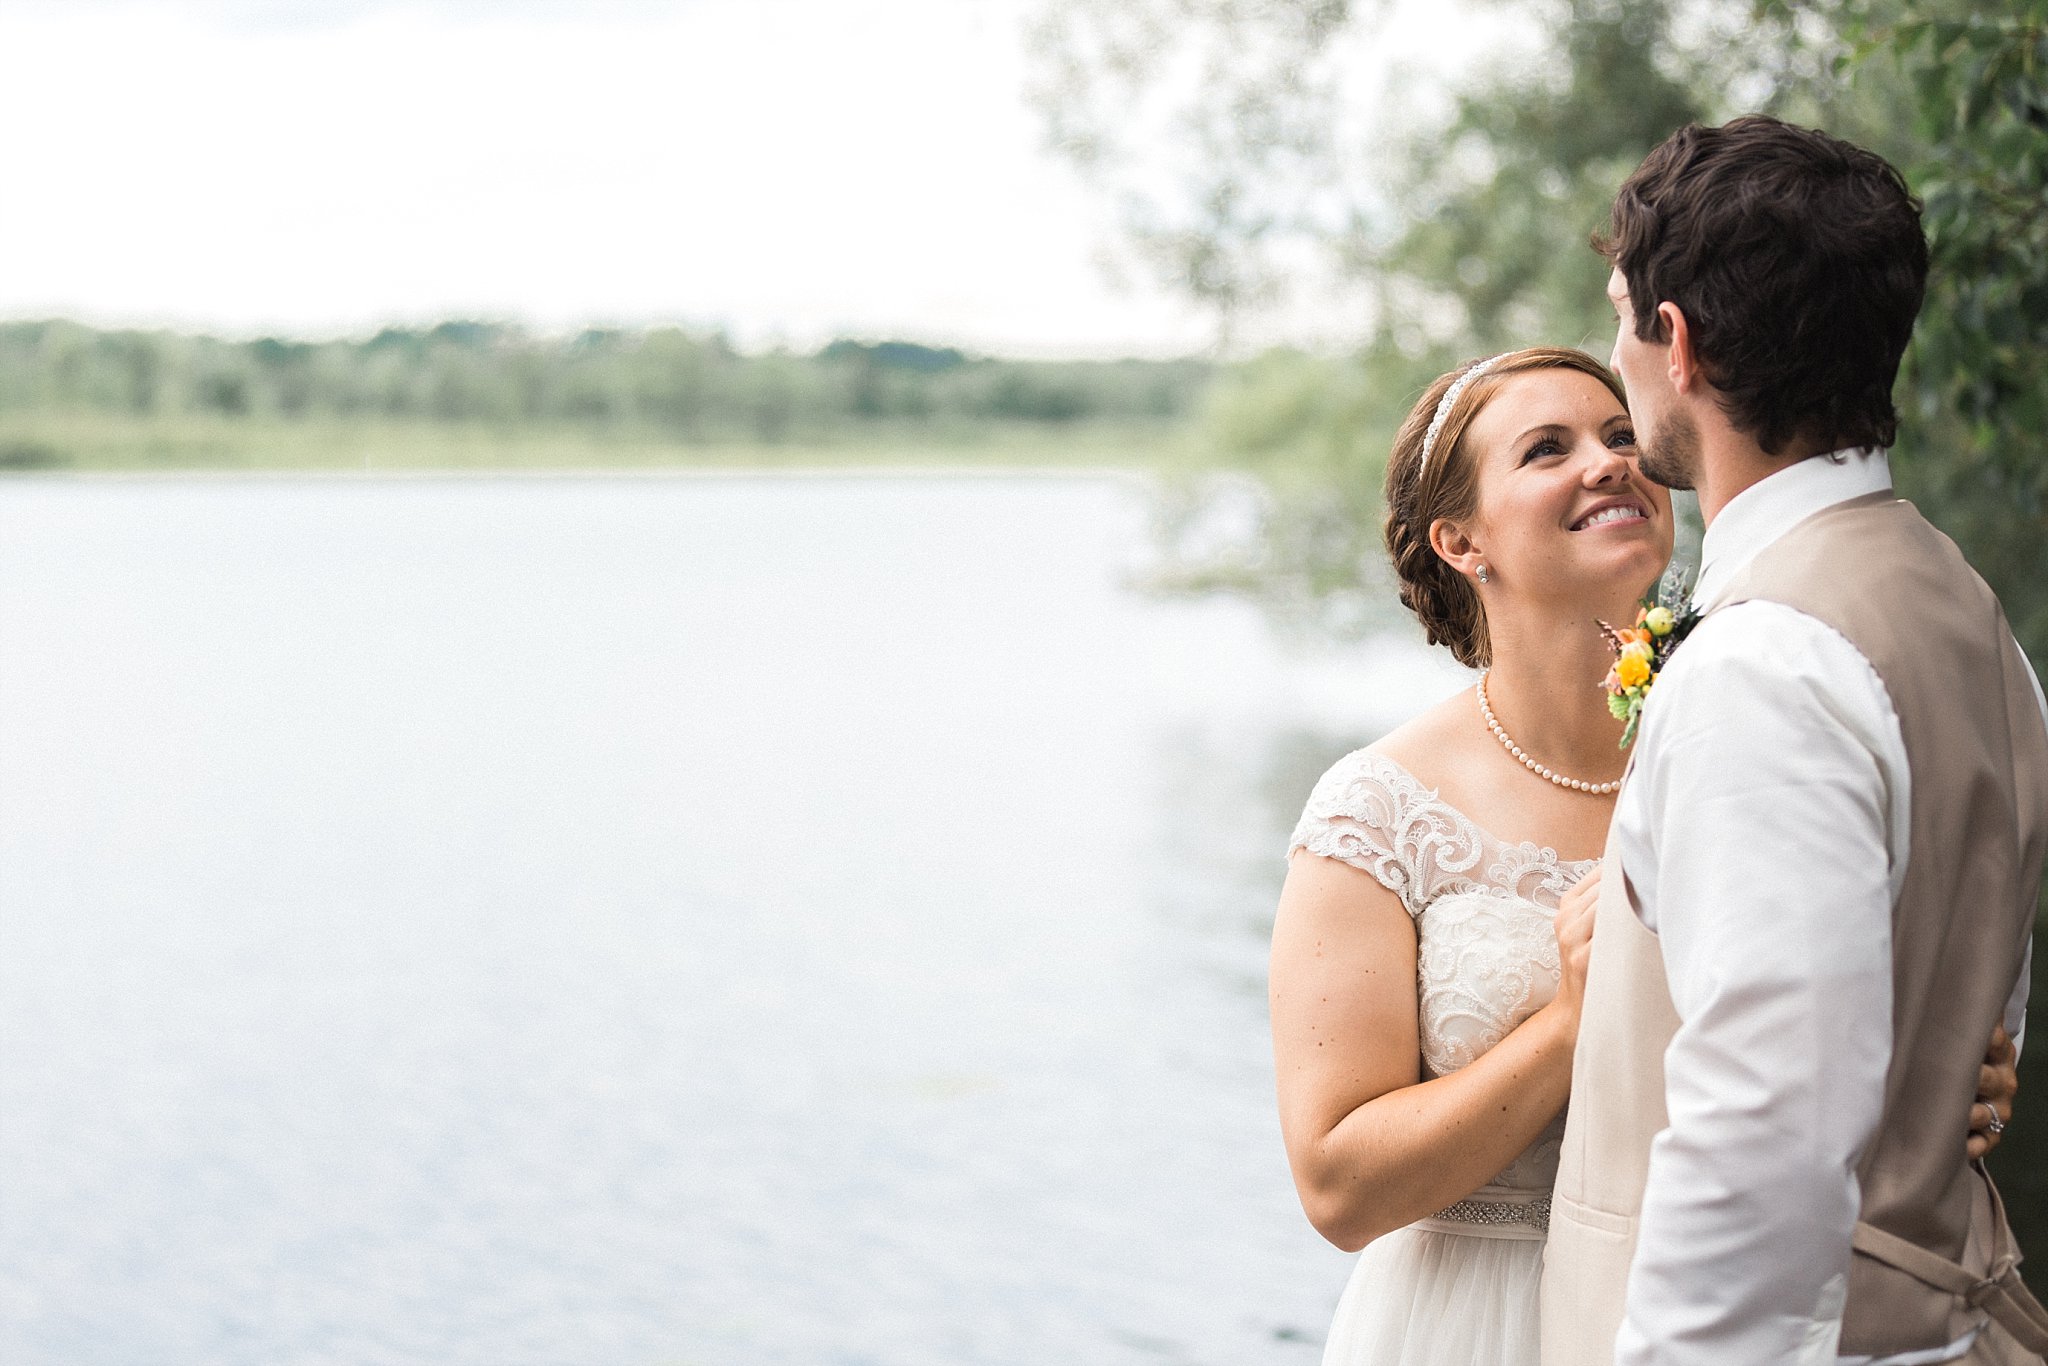 www.james-stokes.com | James Stokes Photography, LLC - Romantic wedding photo by the lake by Wisconsin wedding photographer